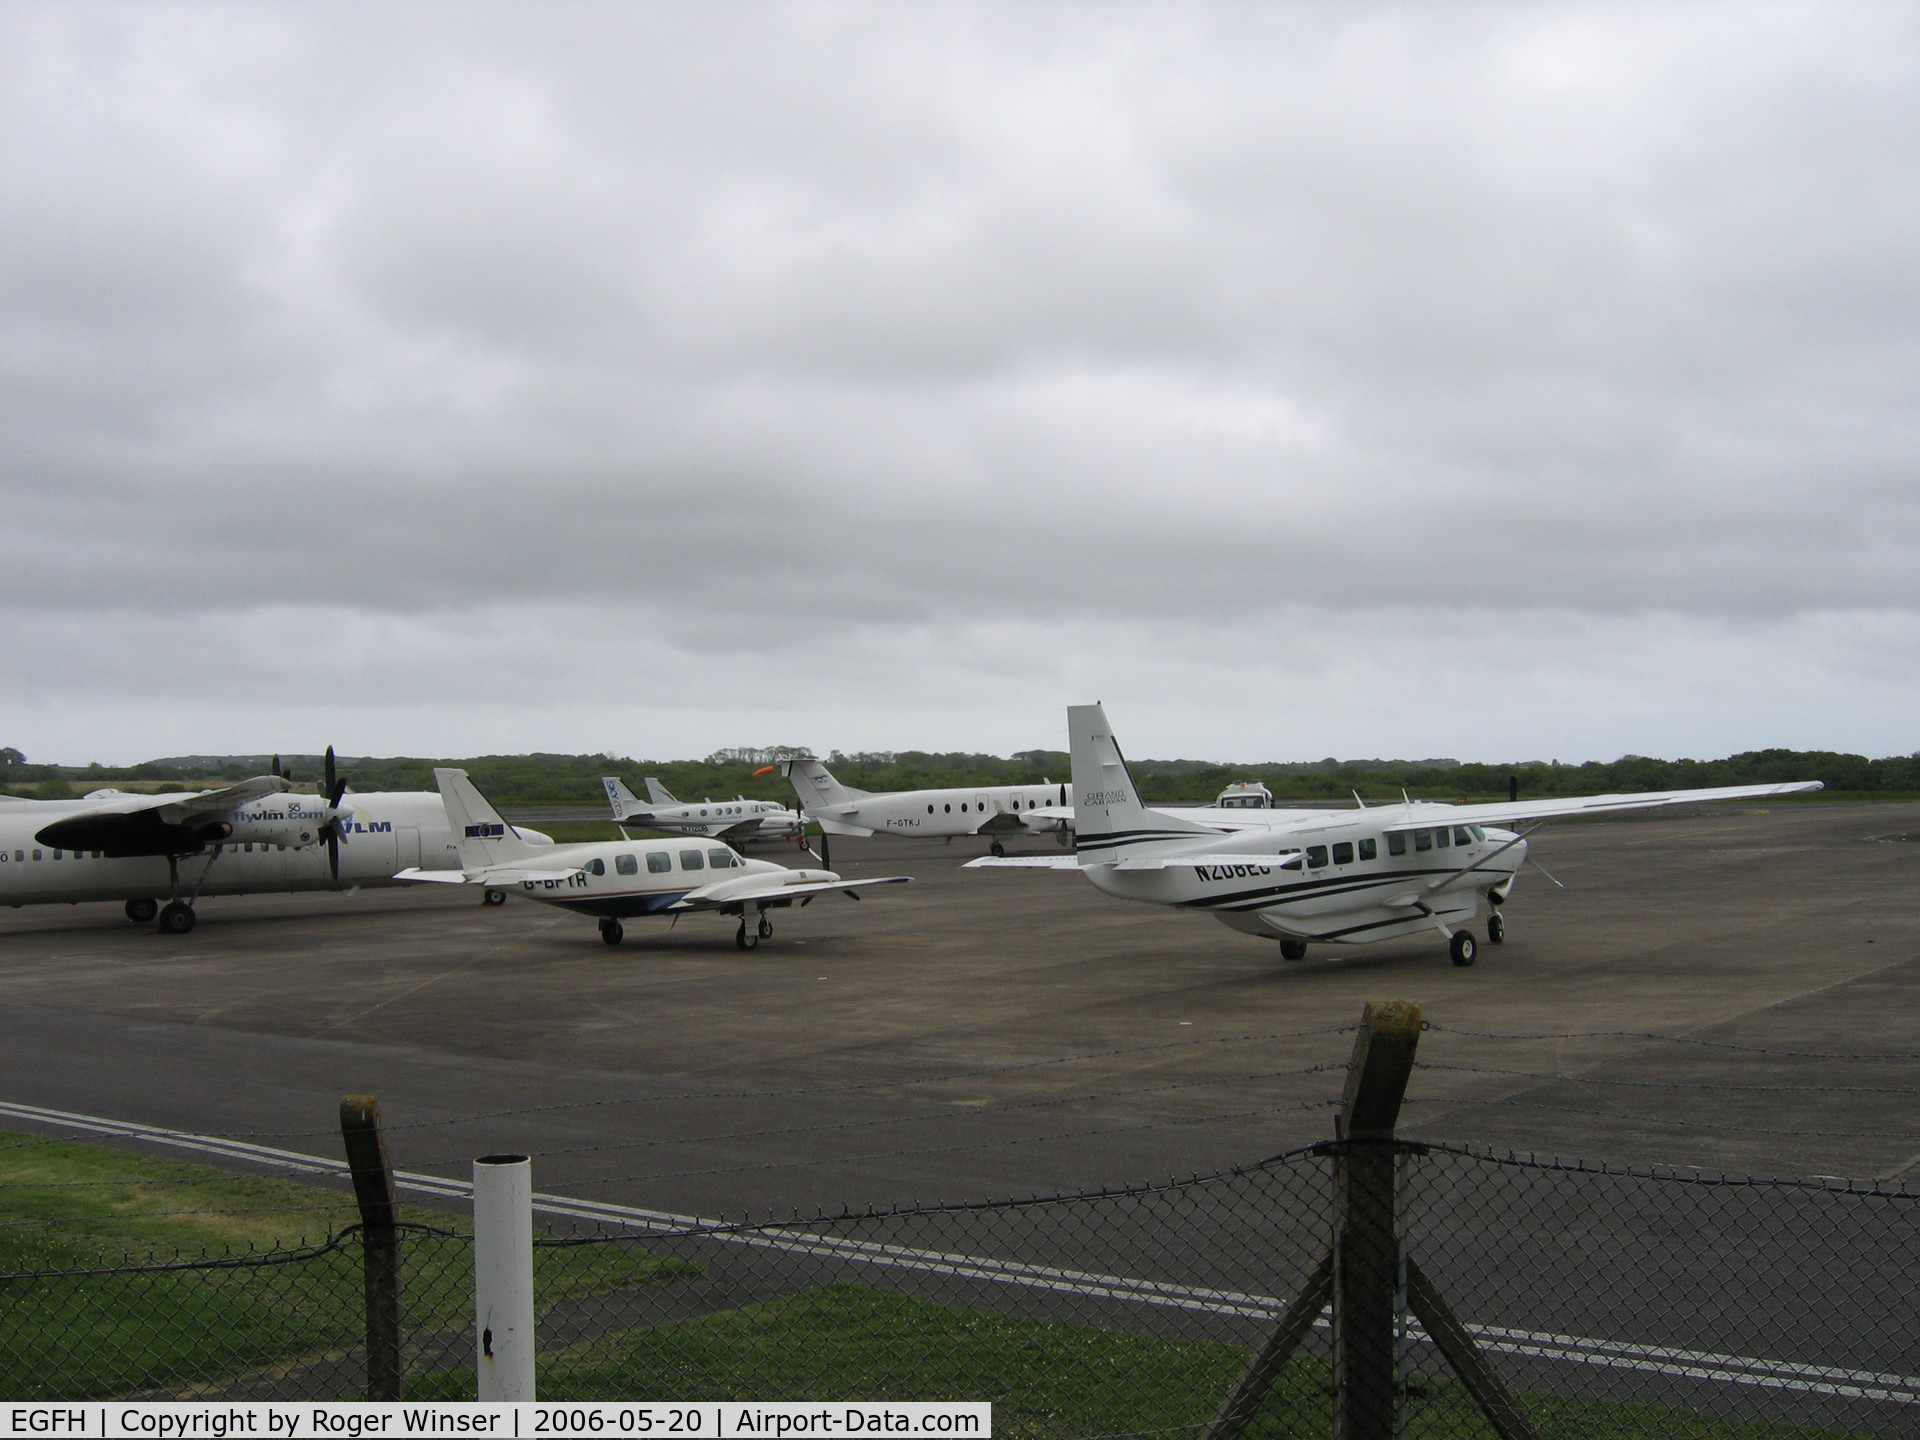 Swansea Airport, Swansea, Wales United Kingdom (EGFH) - Busy day at Swansea Airport